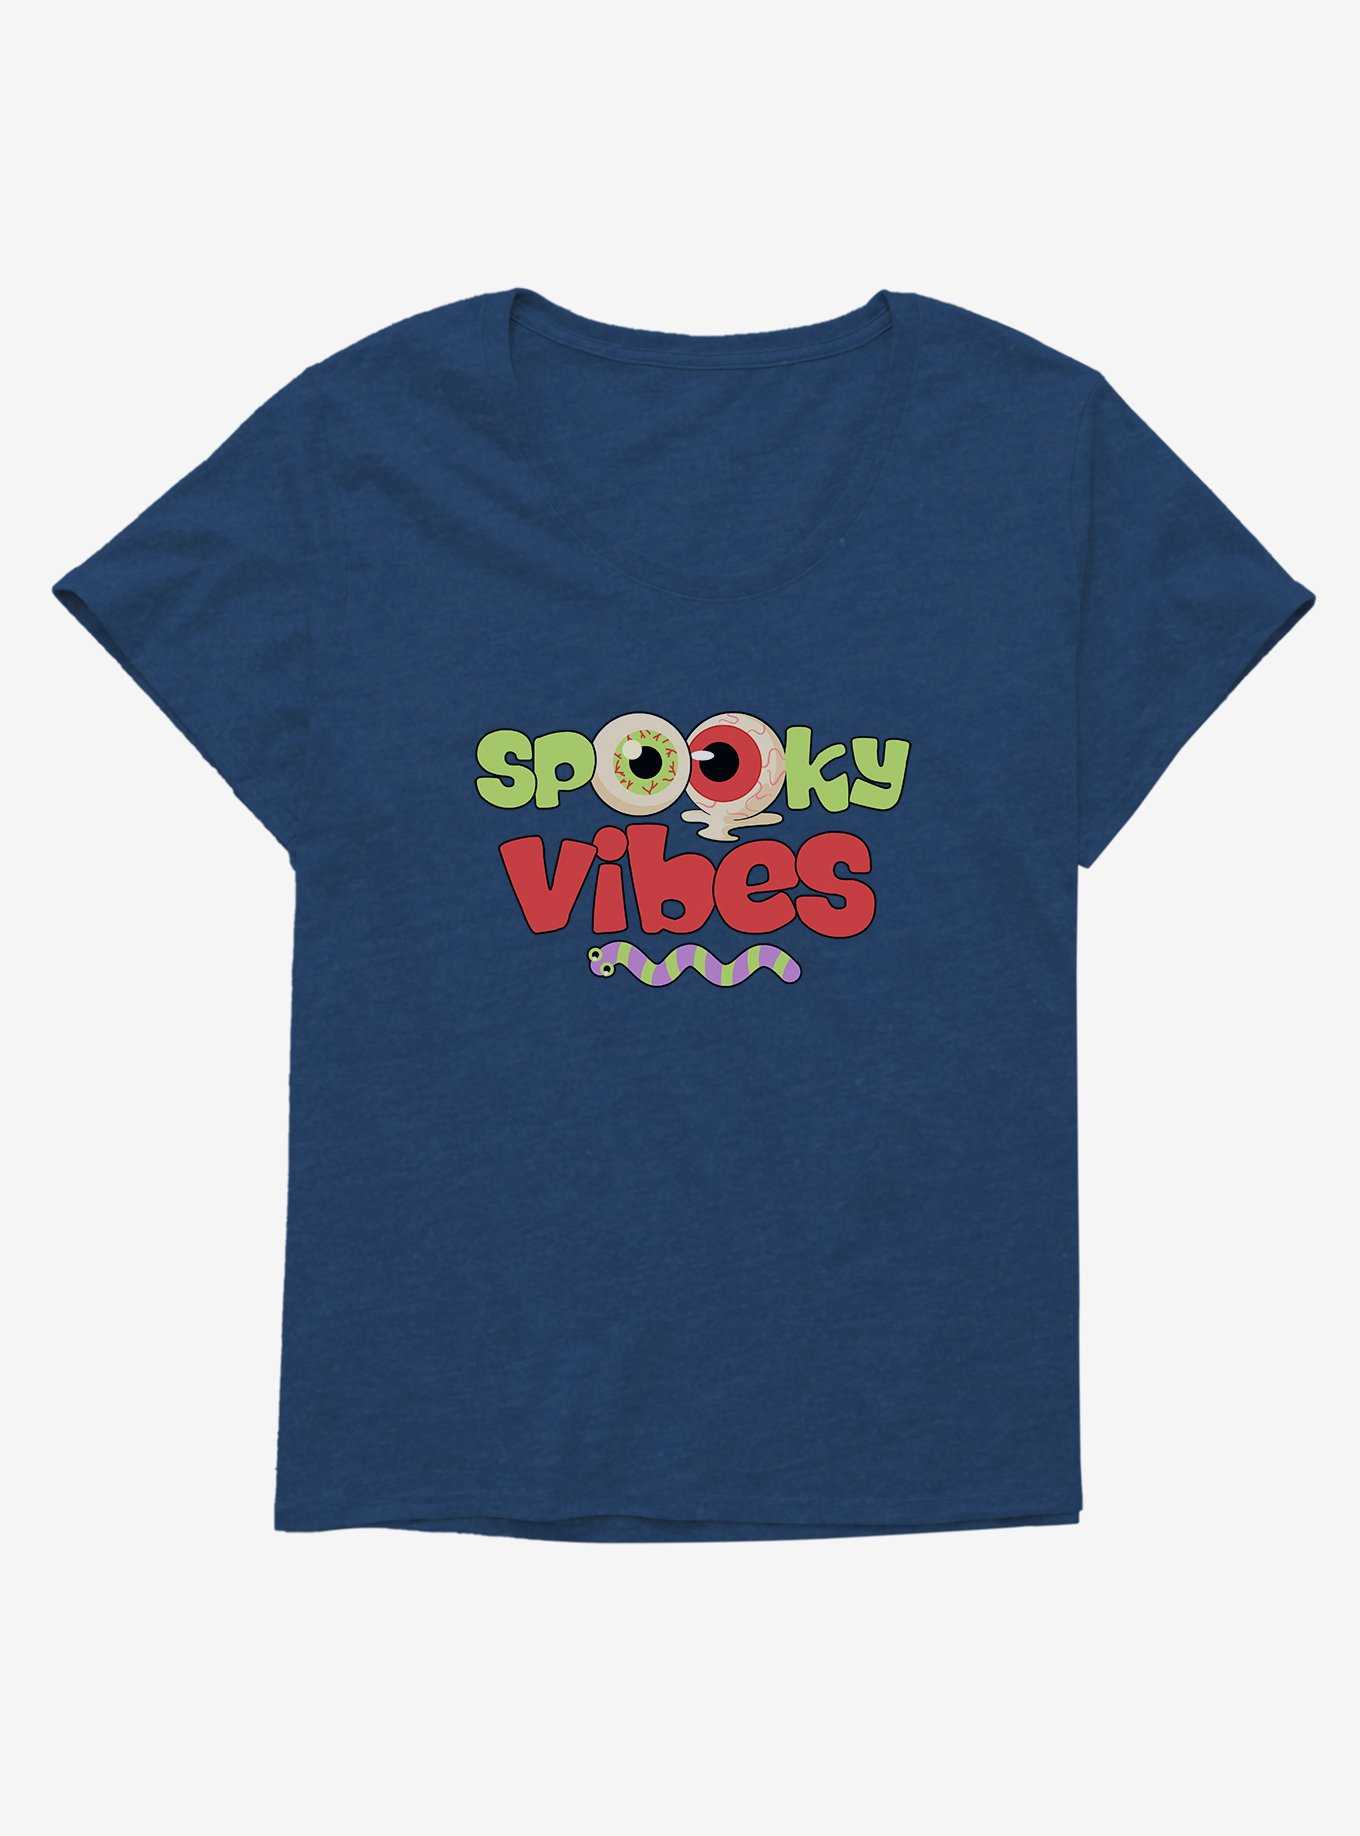 Halloween Spooky Vibes Girls Plus Size T-Shirt, , hi-res